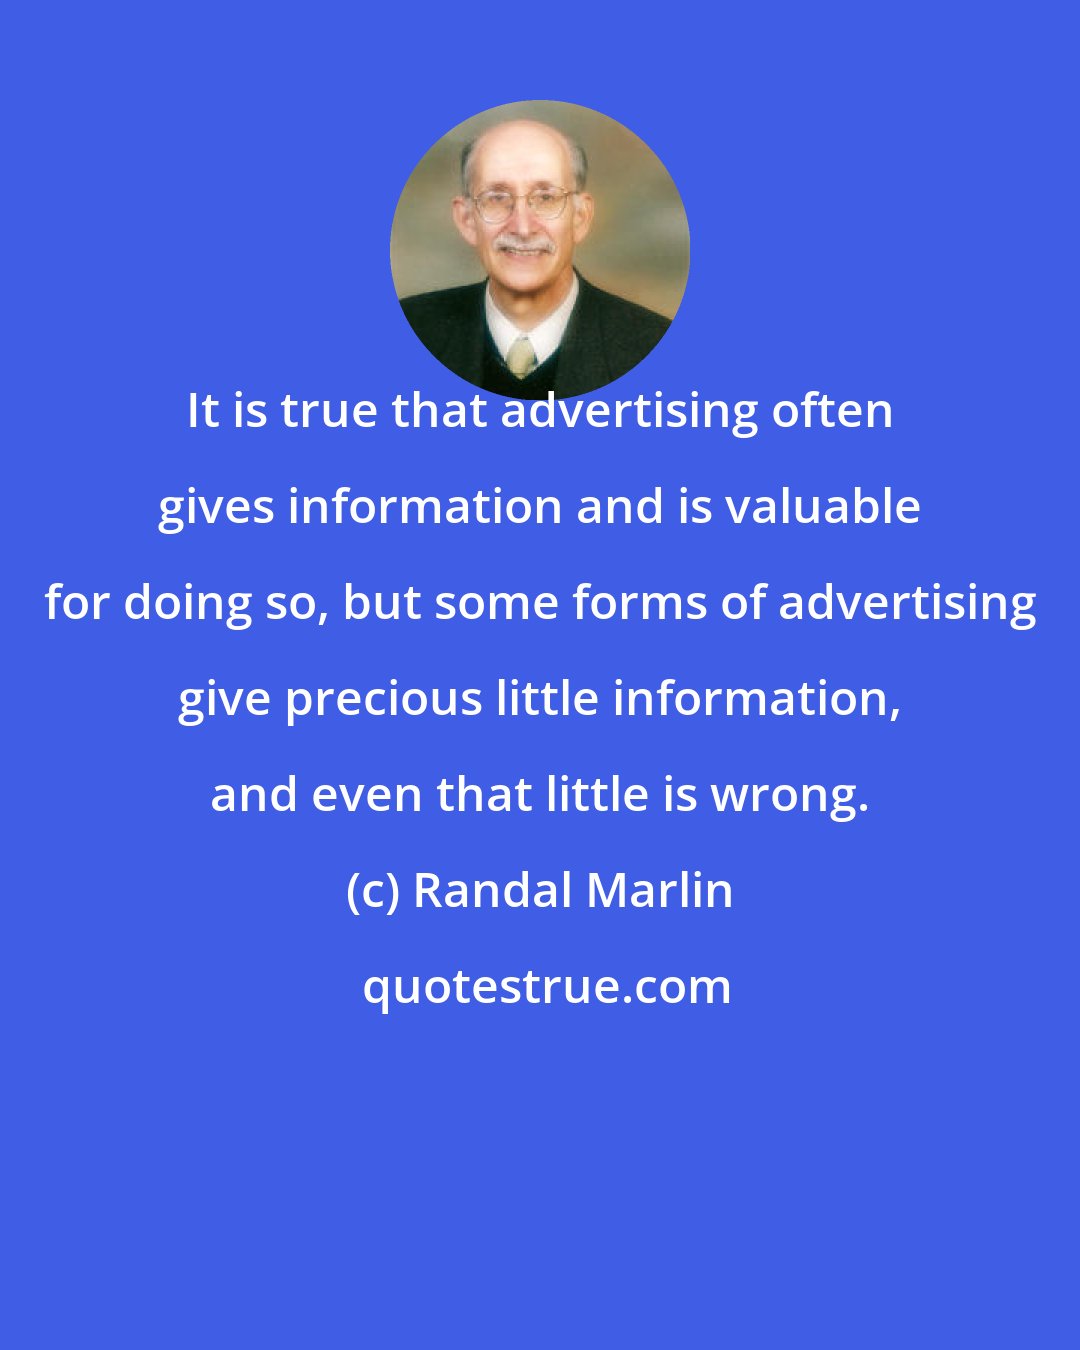 Randal Marlin: It is true that advertising often gives information and is valuable for doing so, but some forms of advertising give precious little information, and even that little is wrong.